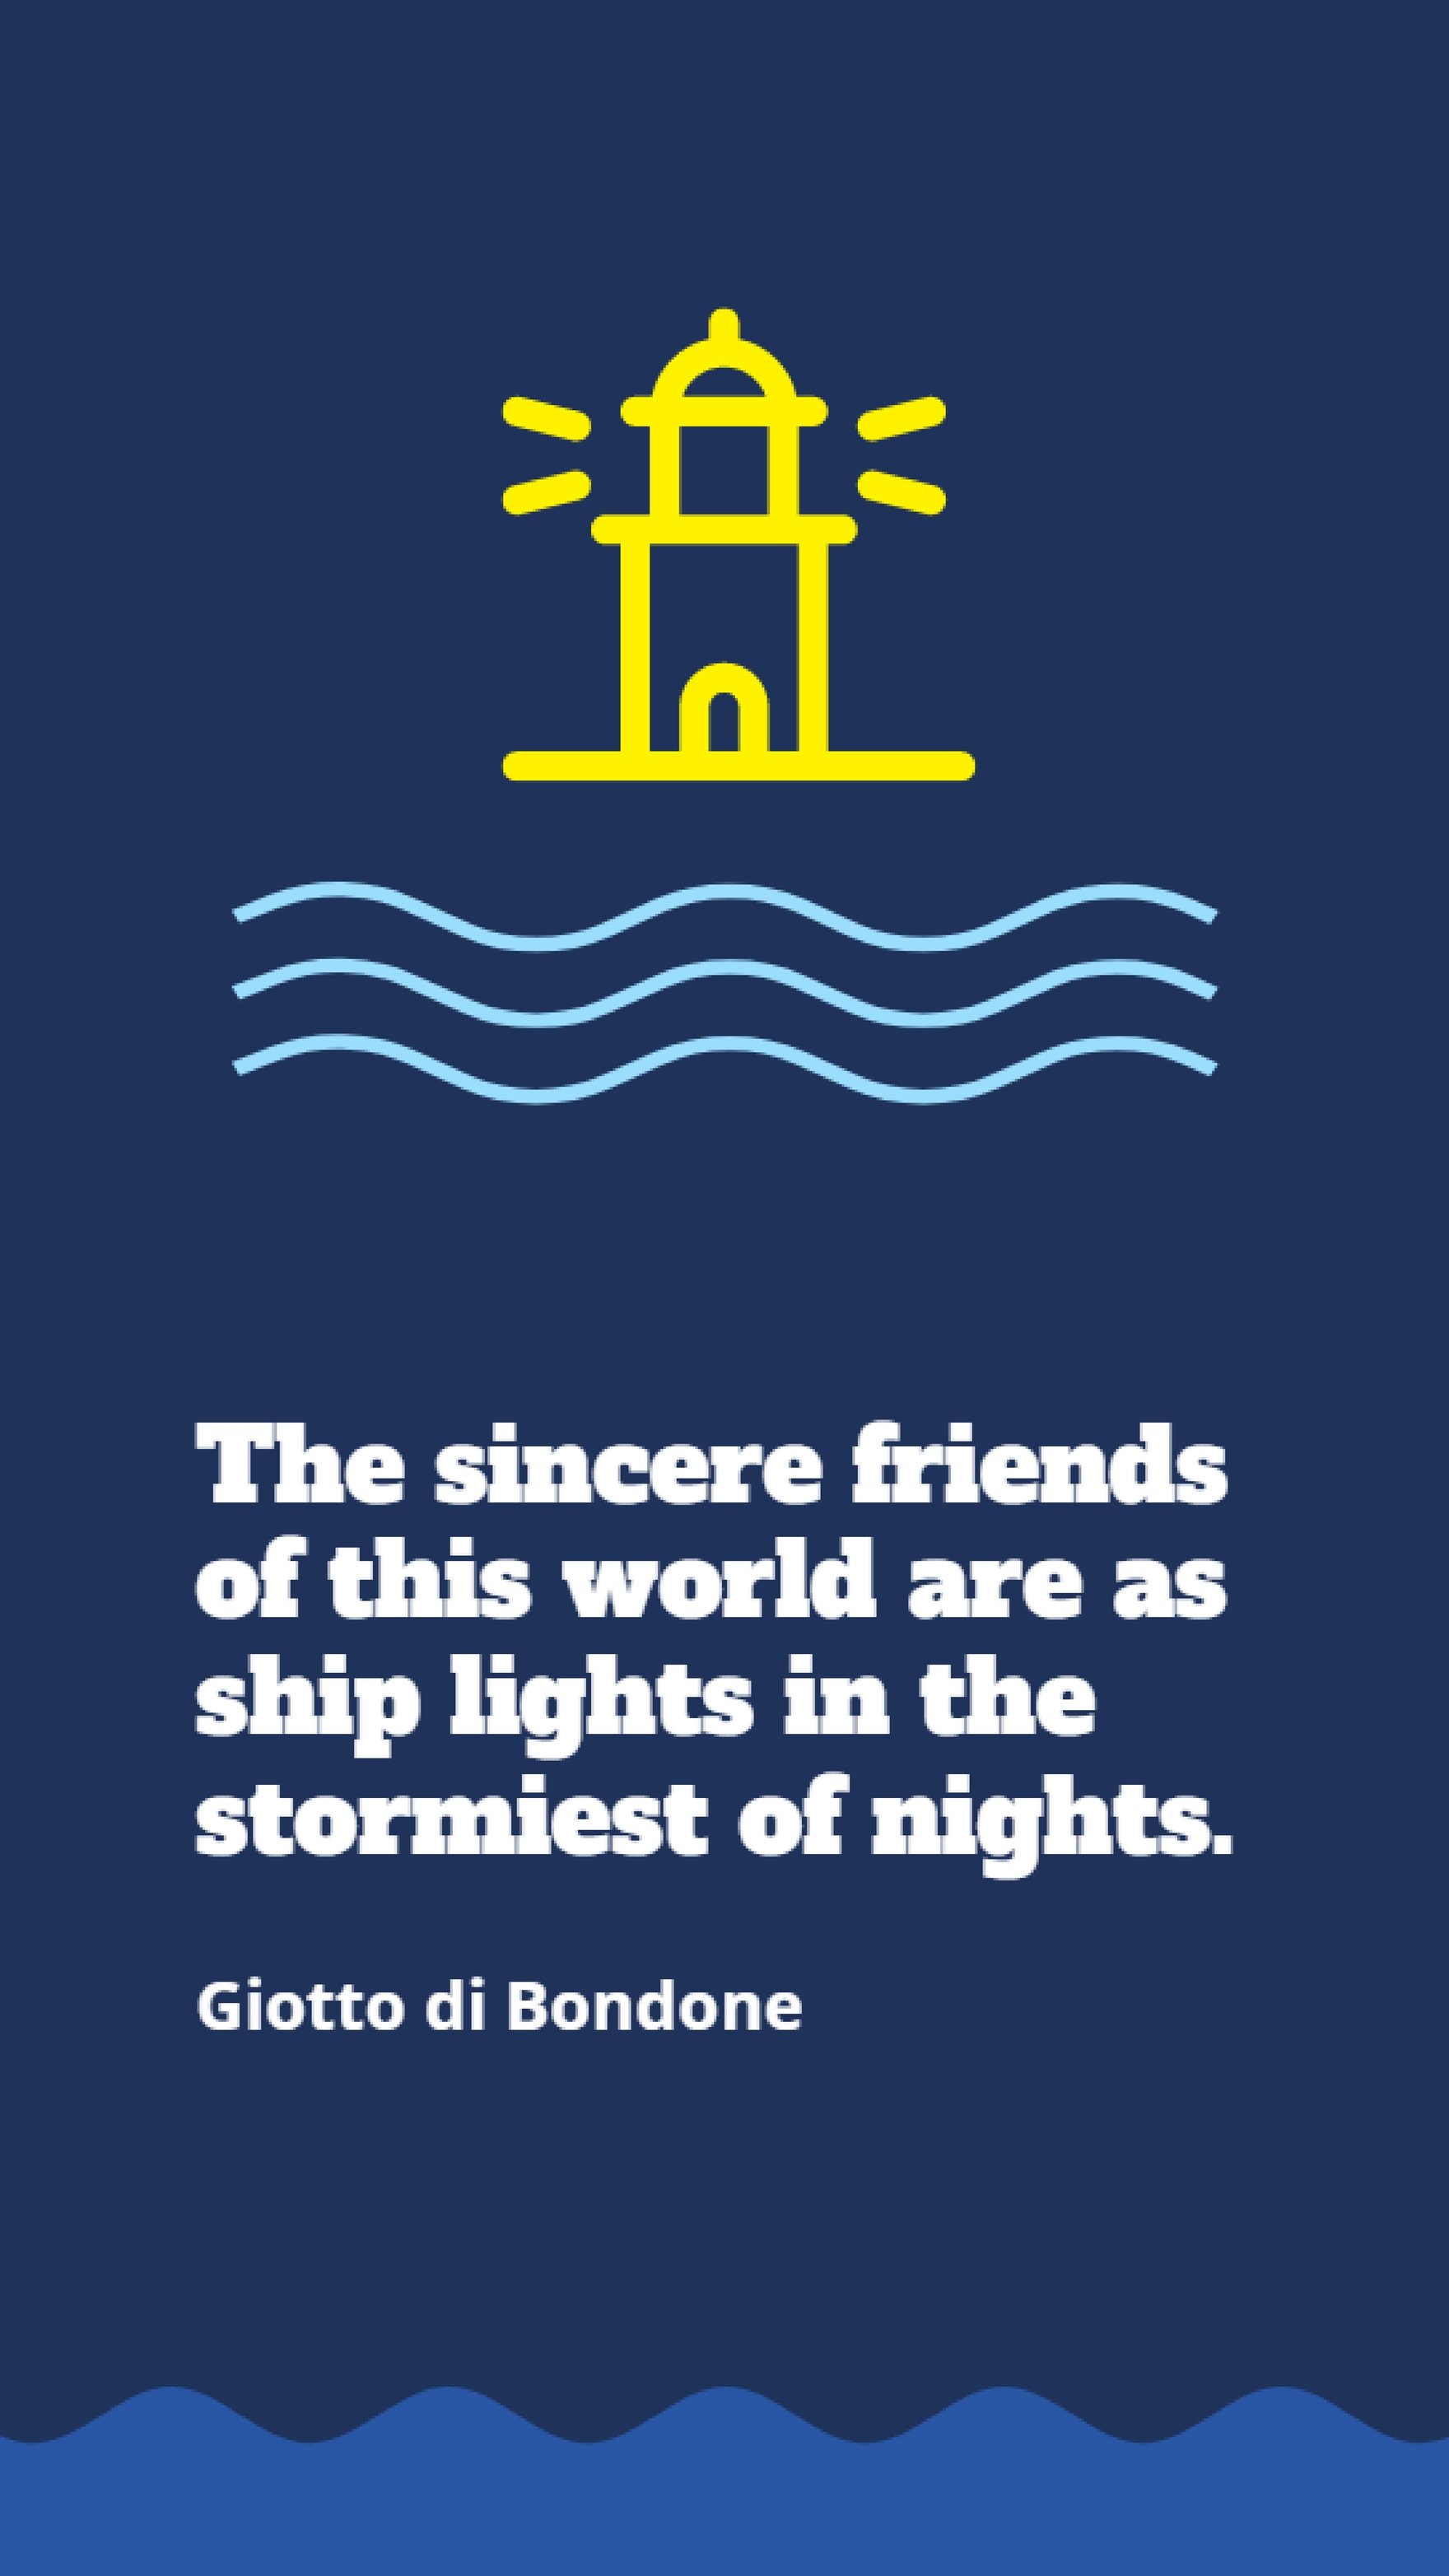 Giotto di Bondone - The sincere friends of this world are as ship lights in the stormiest of nights. Template